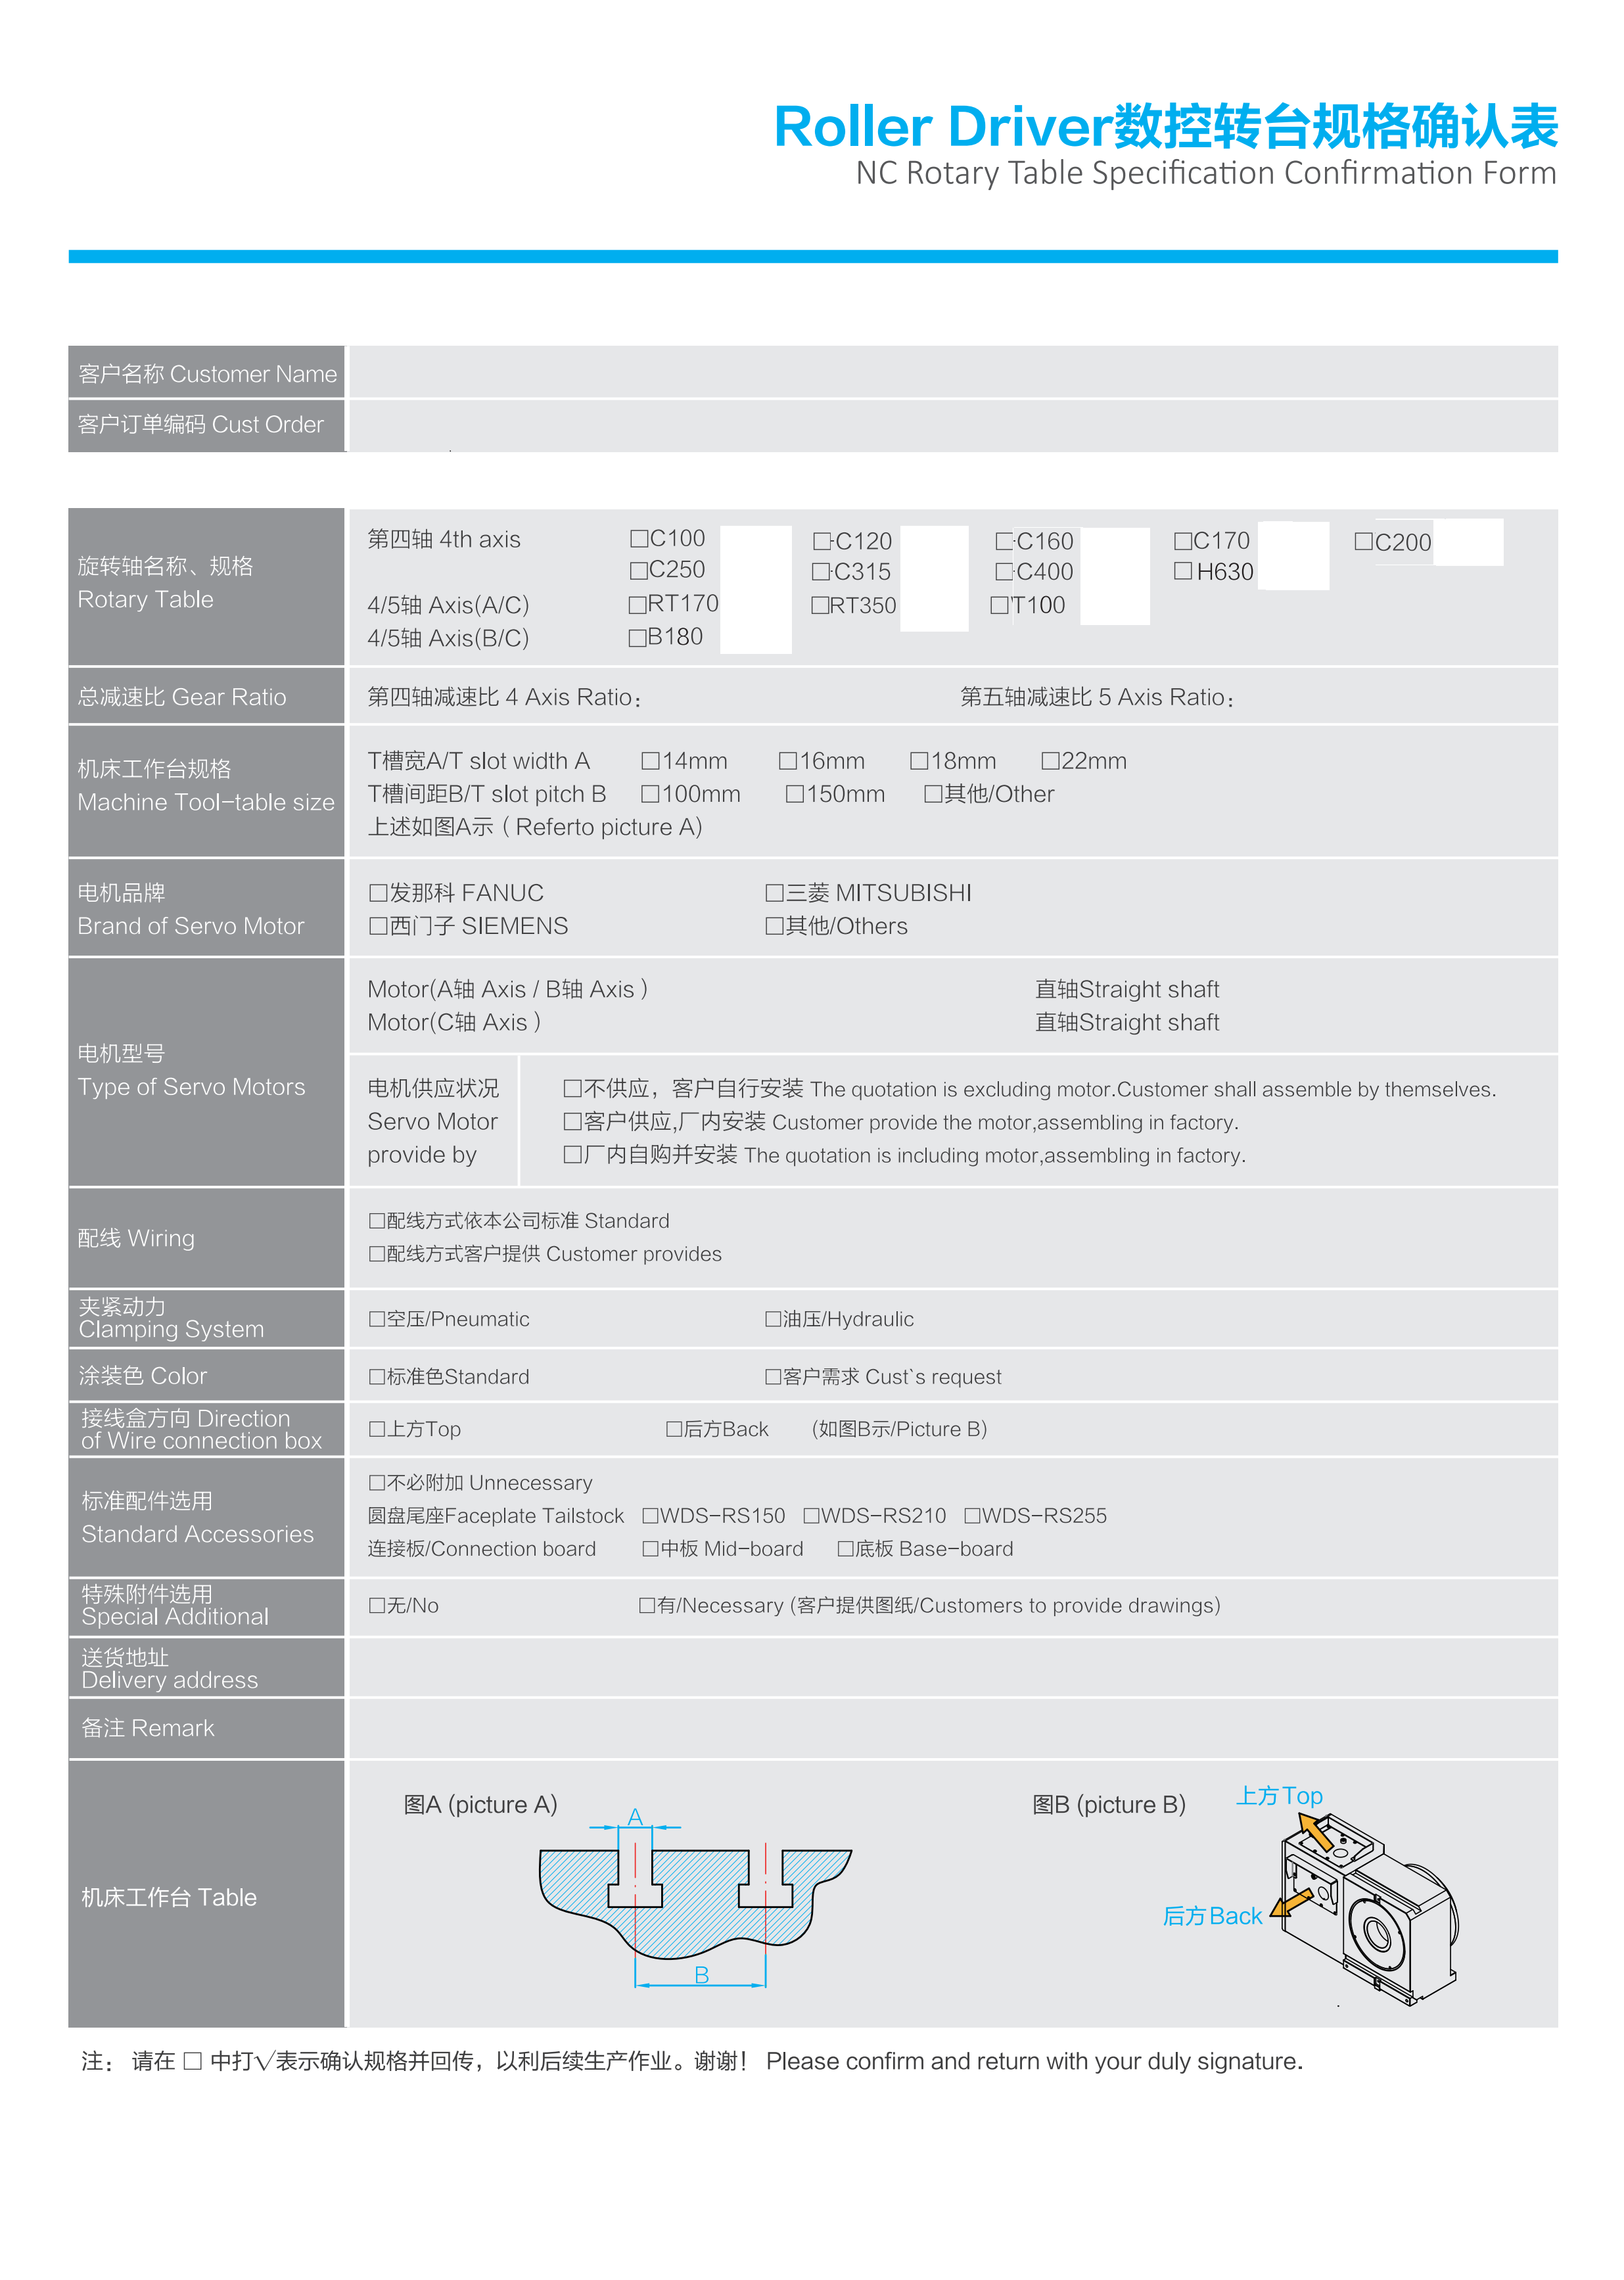 rotary-table-specification-confirmation-form-1